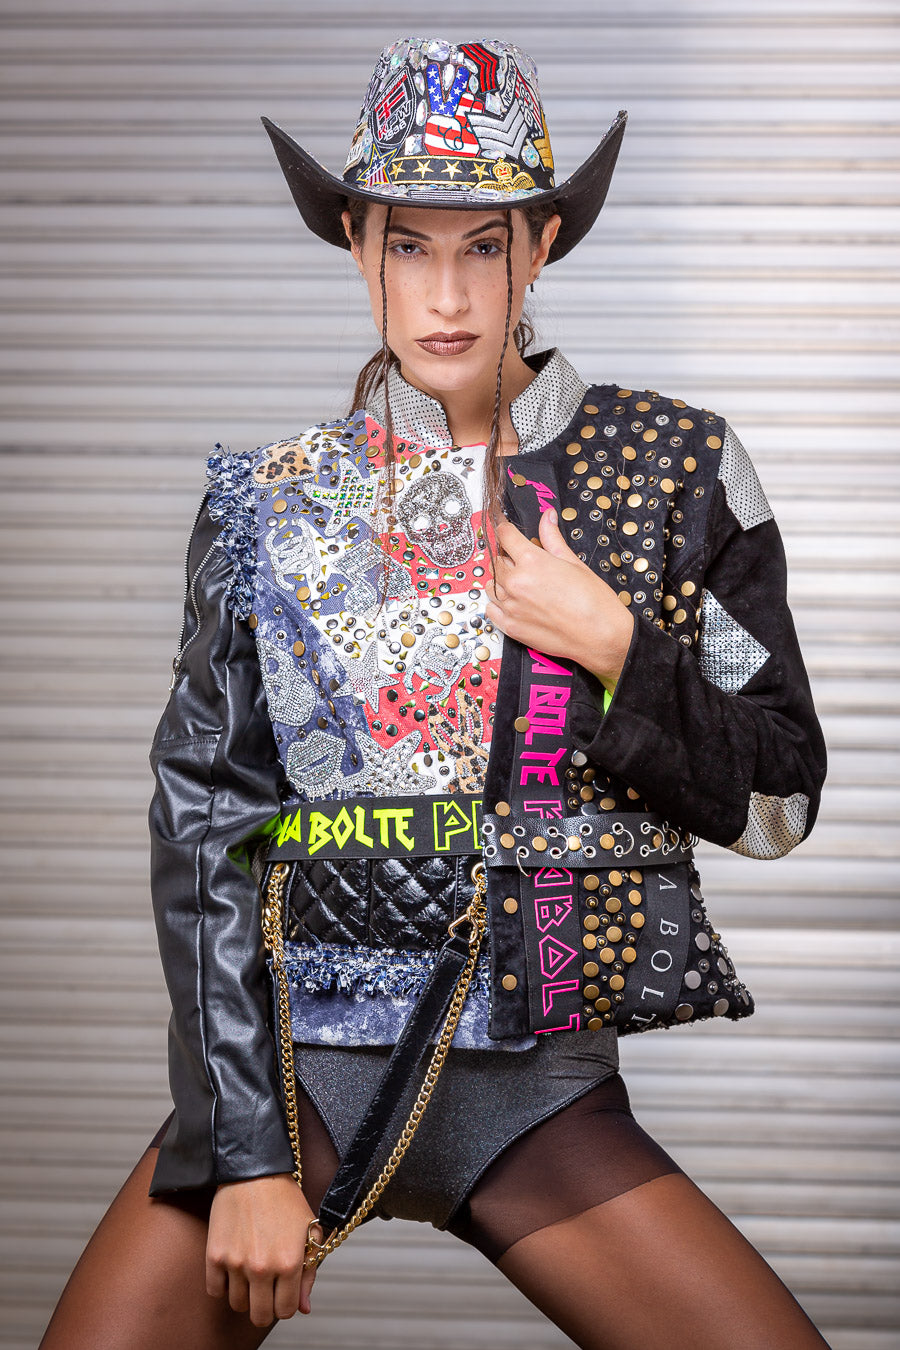 PIA BOLTE® Jacket COWGIRL 2020 - PIA BOLTE® COUTURE